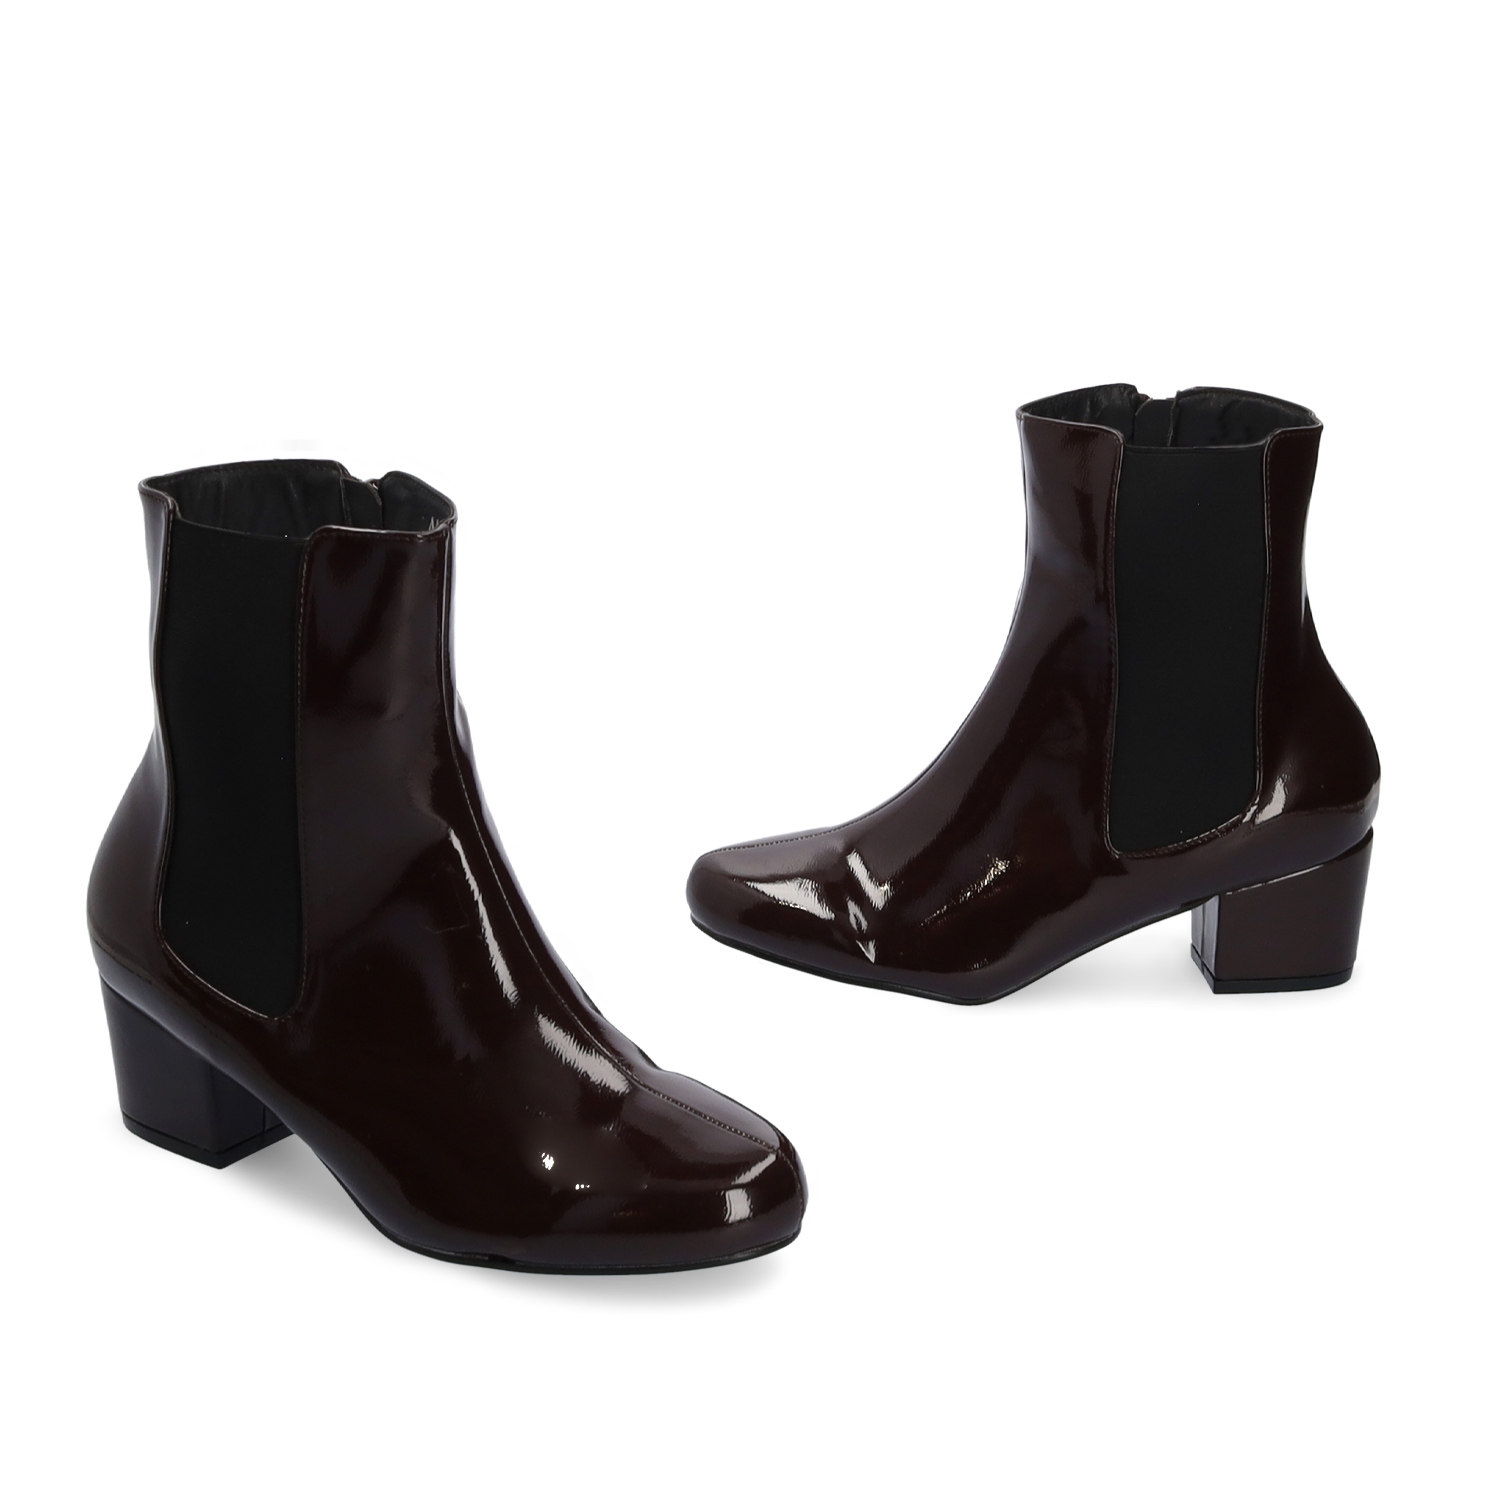 Wide heel booties in bordeaux patent and matching elastic 